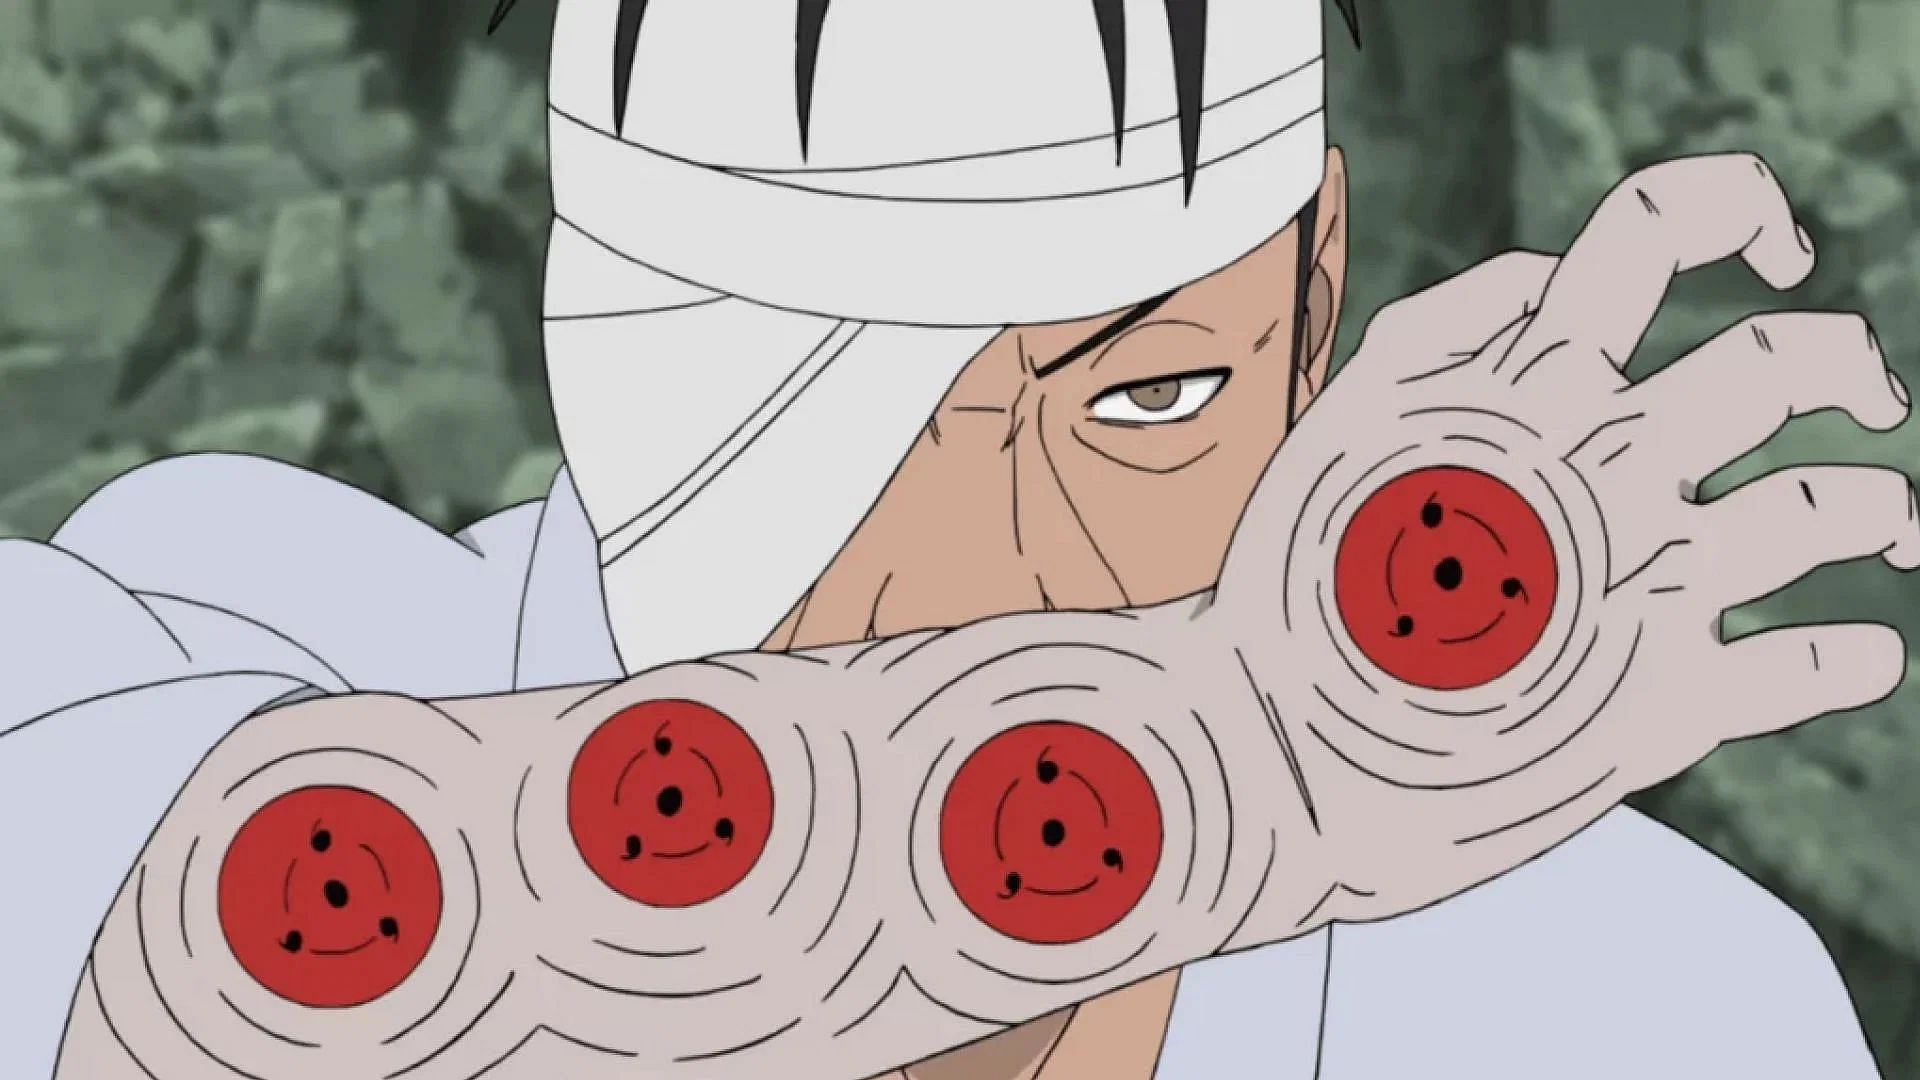 Danzo Shimura is undoubtedly the most hated character of the Naruto series (image via Studio Pierrot)